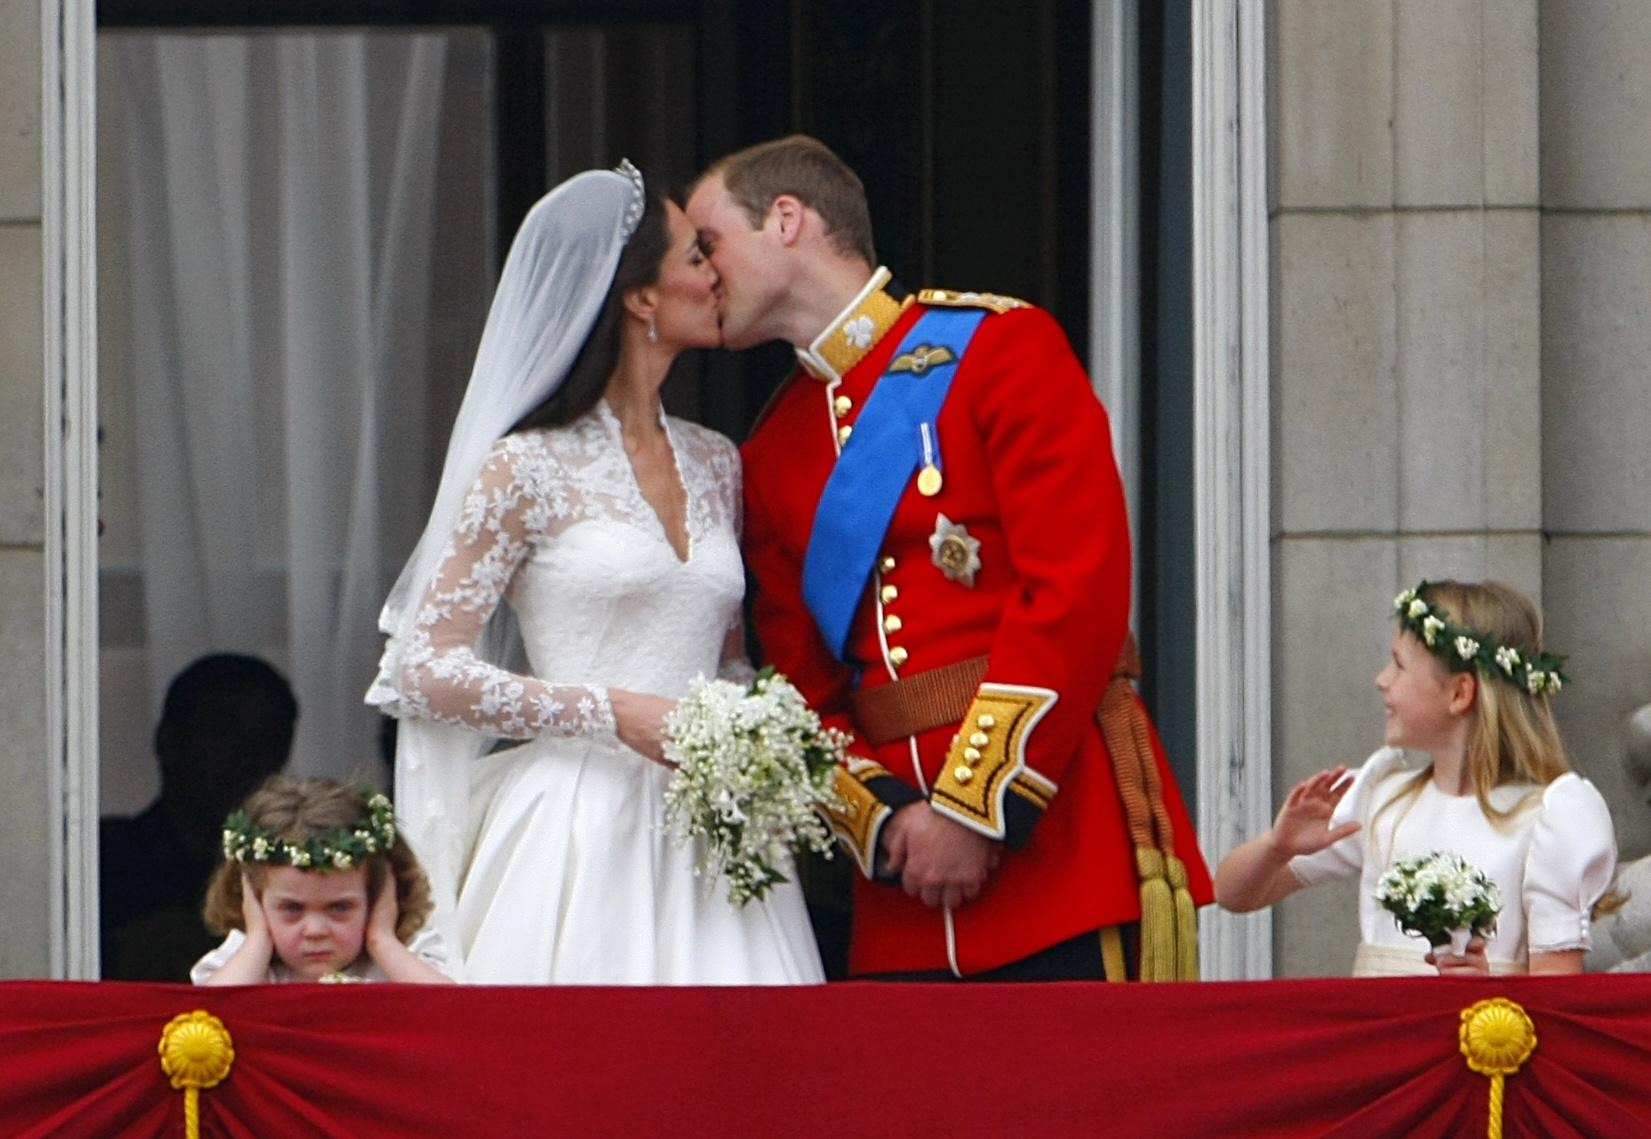 William and Kate kiss on the balcony as Grace van Cutsem covers her ears